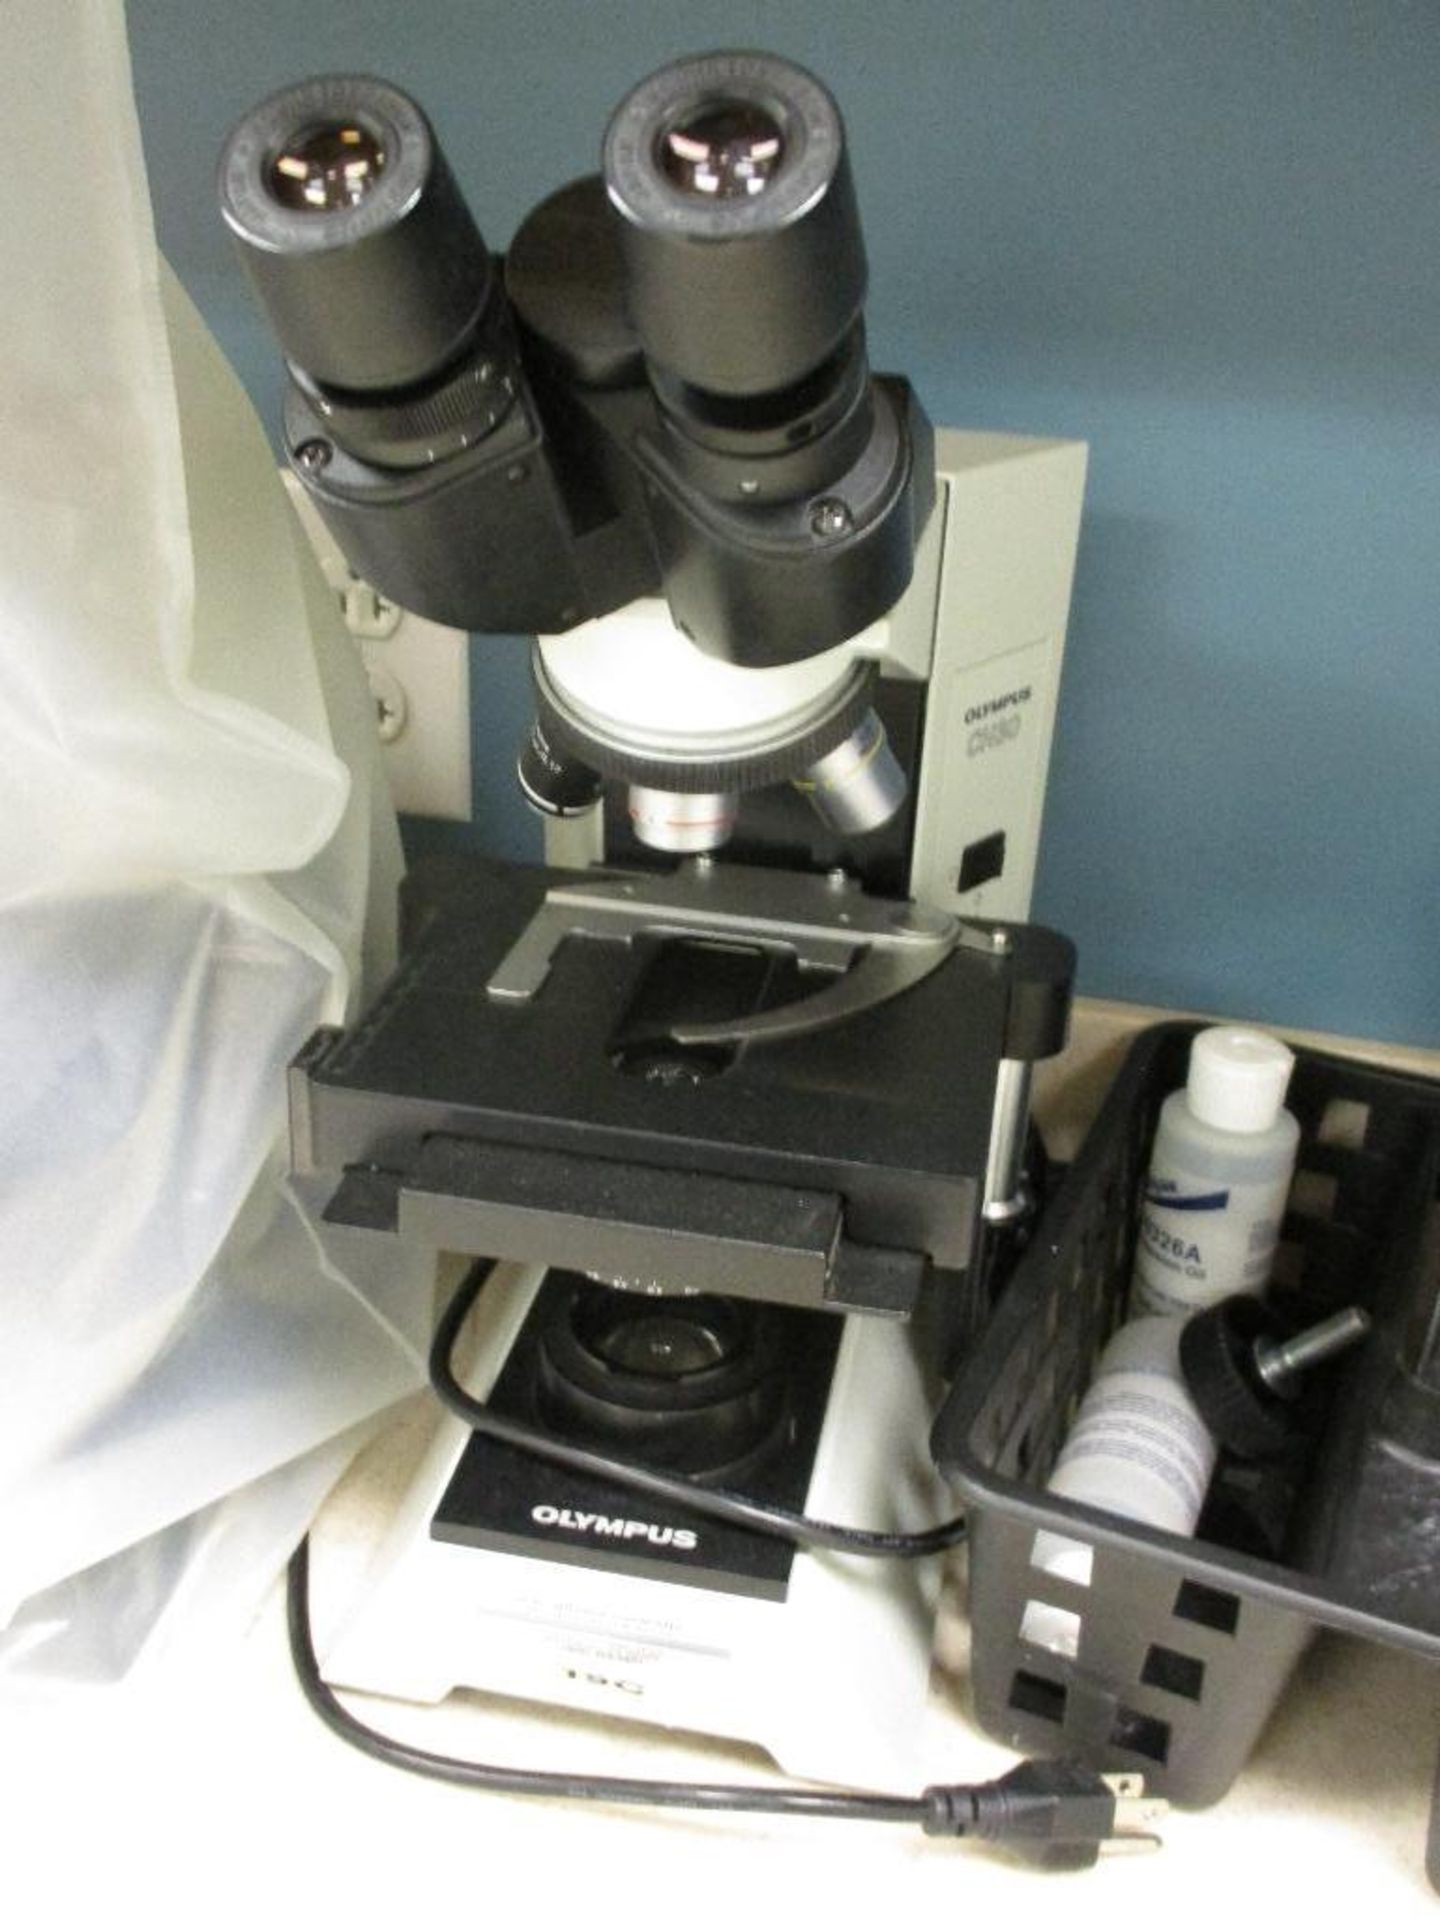 2 Microscopes and contents of cabinets, Not tagged